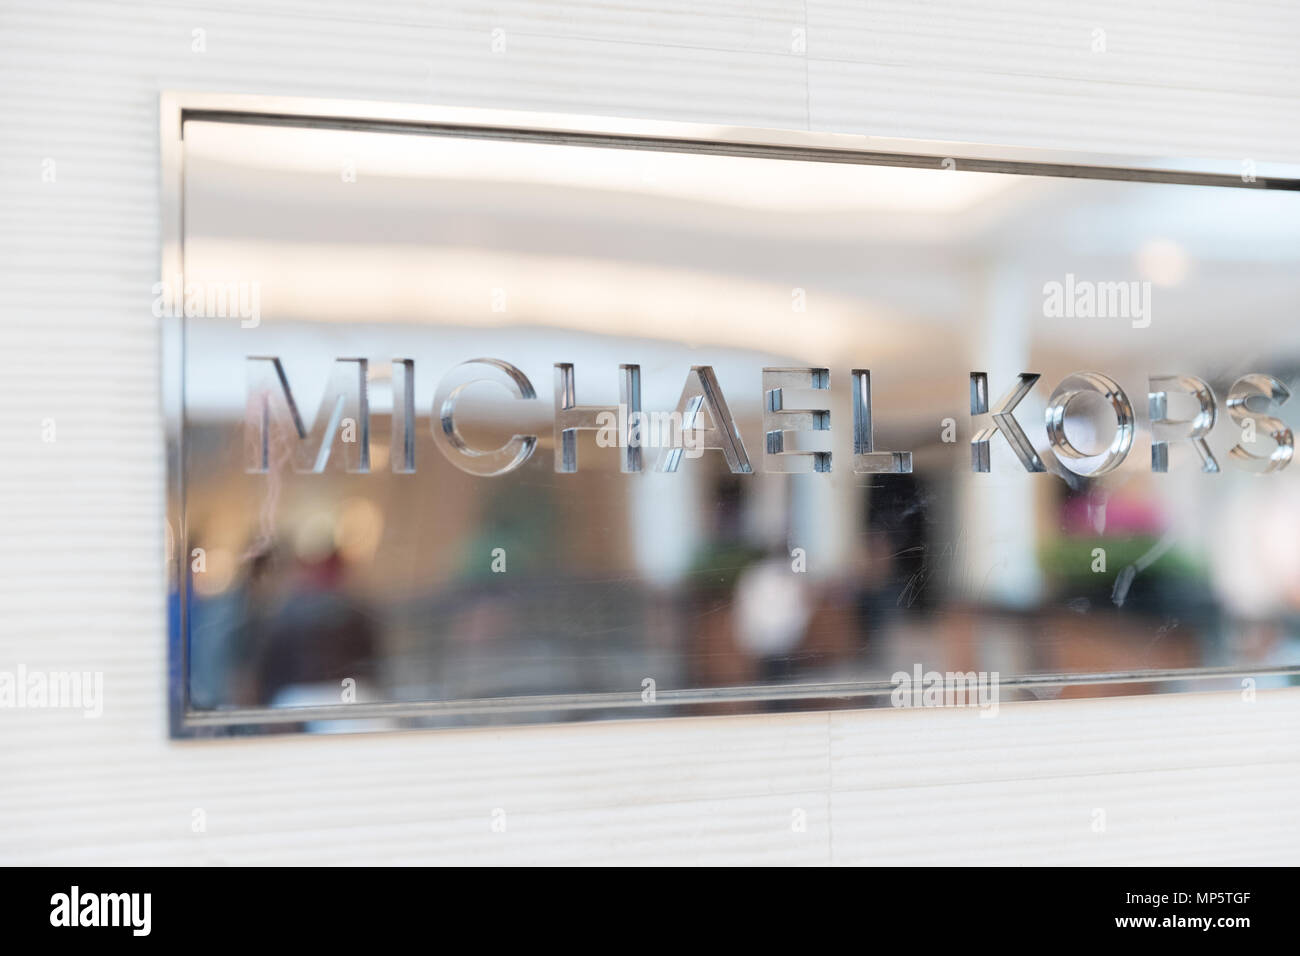 Philadelphia, Pennsylvania, May 19 2018: An exterior view of the Michael Kors store in shopping mall. Michael Kors is an American luxury fashion compa Stock Photo